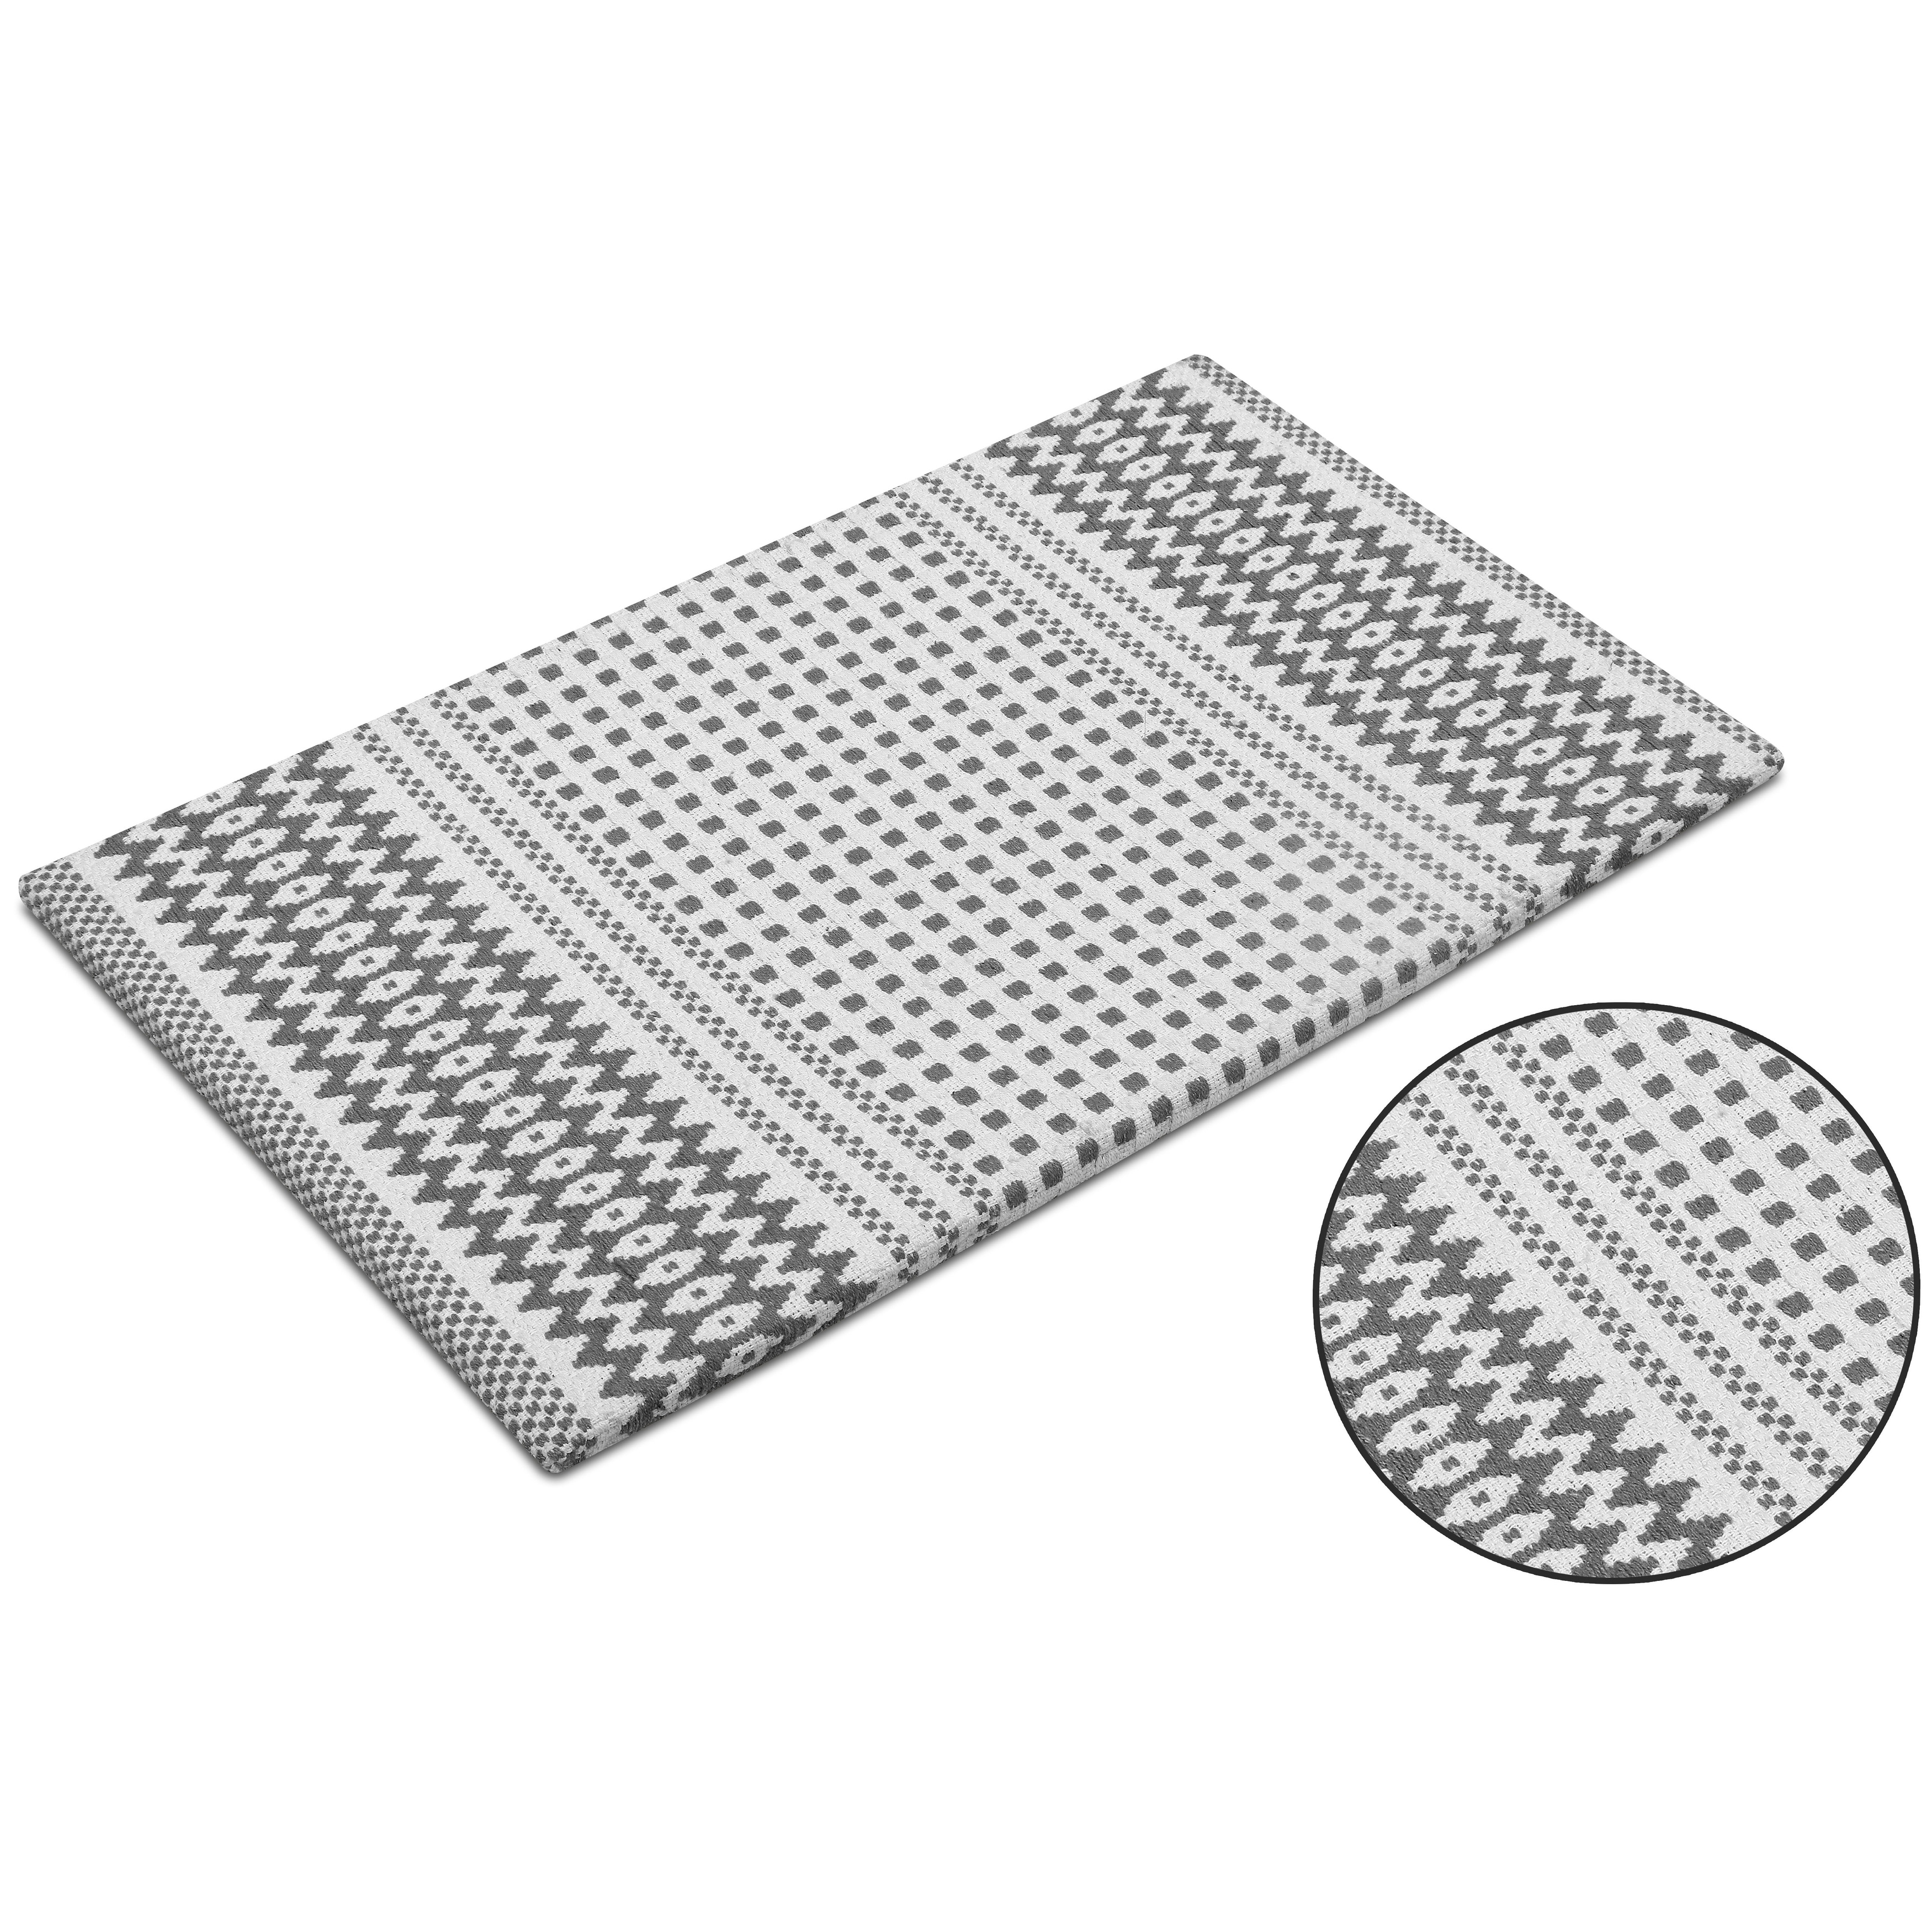 https://ak1.ostkcdn.com/images/products/is/images/direct/e138ecf8a7bebf0918424a6cf7331d67e2c395a2/Kitchen-Mat-Cushioned-Anti-Fatigue-Kitchen-Rug%2C-Non-Slip-Mats-Comfort-Foam-Rug-for-Kitchen%2C-Office%2C-Sink%2C-Laundry---18%27%27x30%27%27.jpg